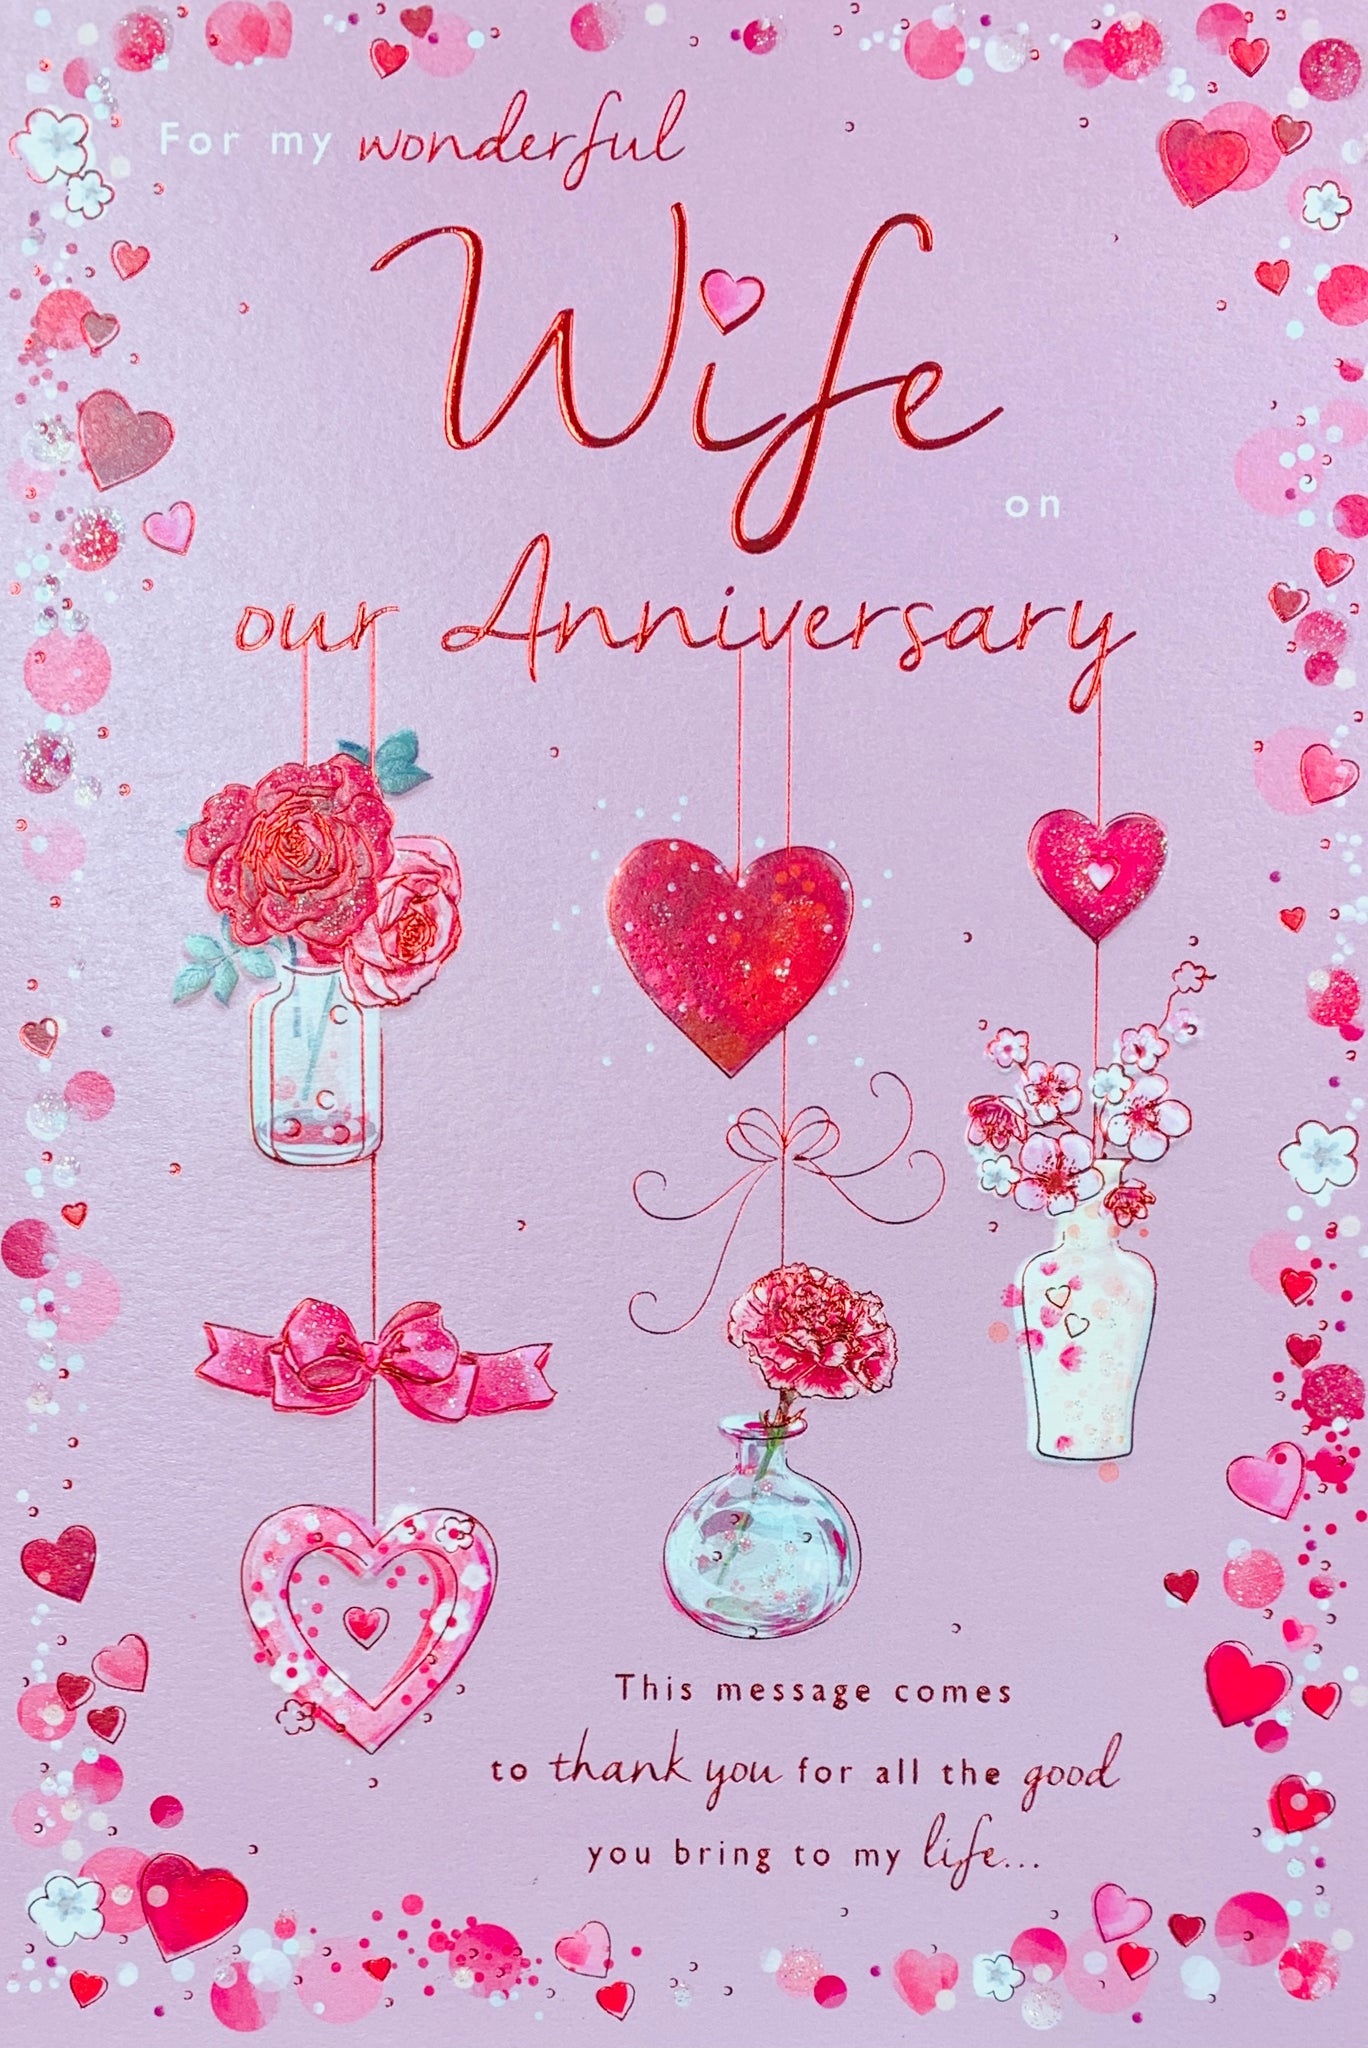 Wife anniversary card - hearts and flowers